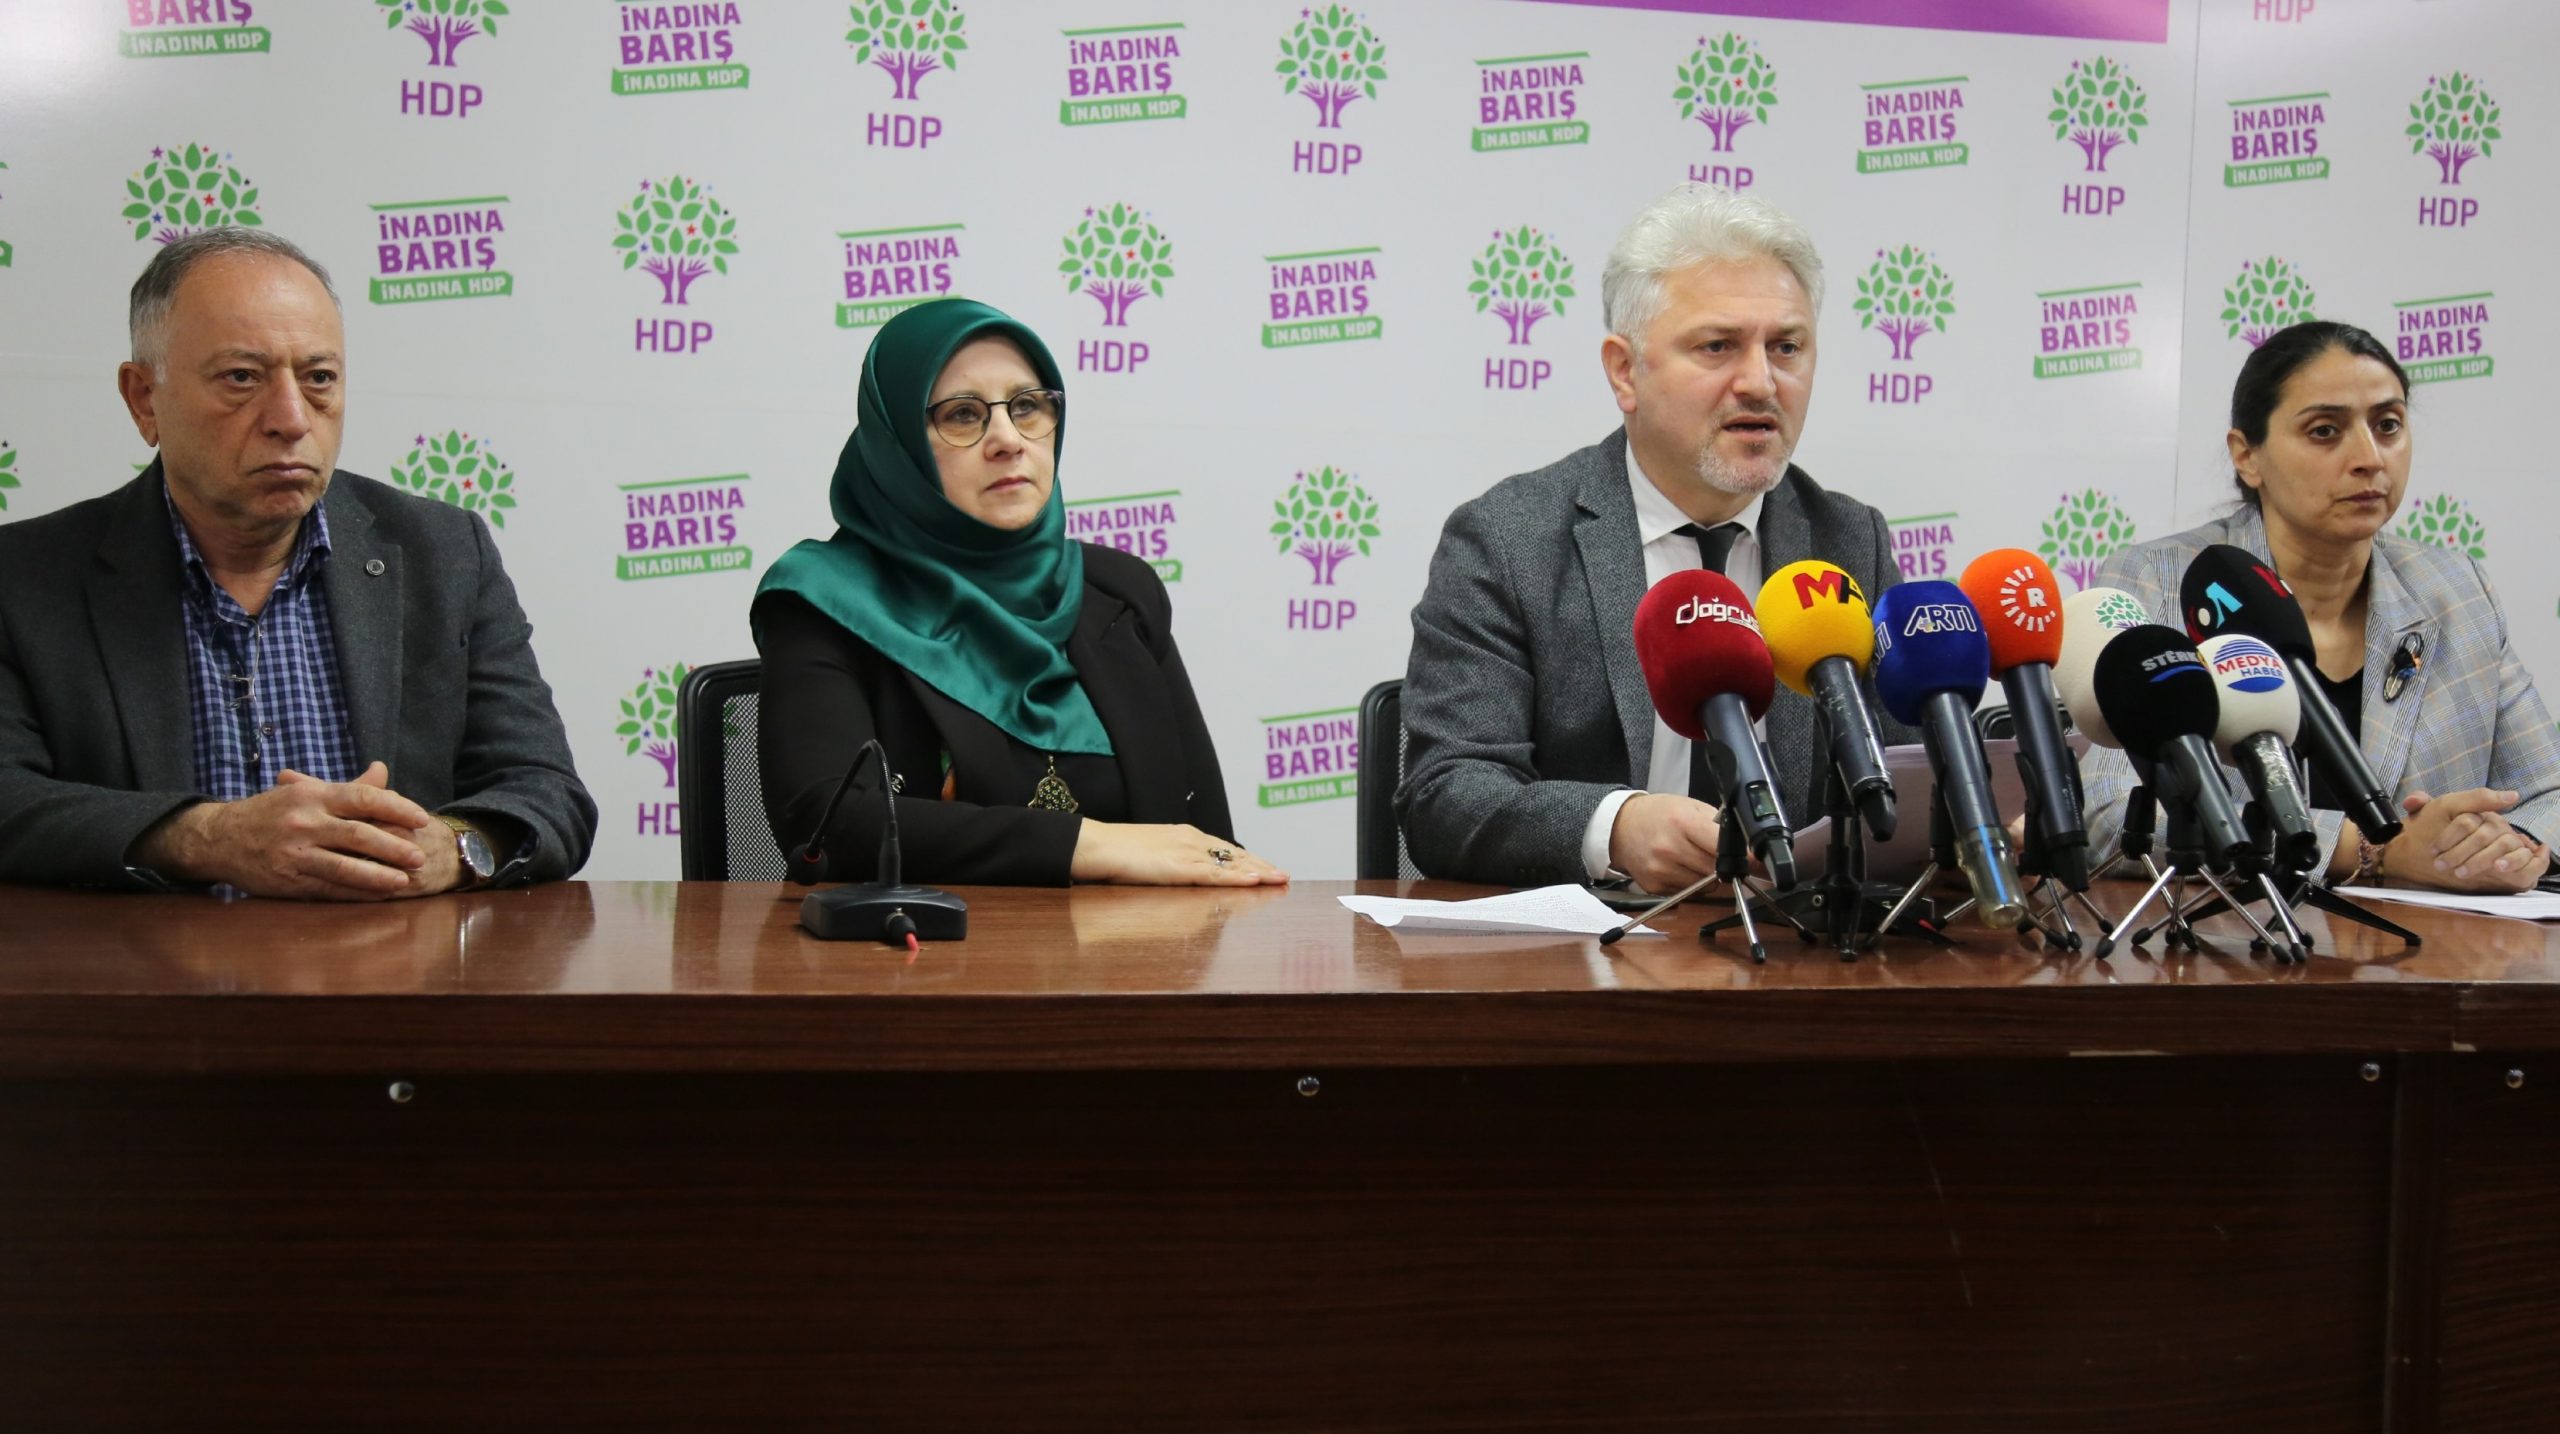 HDP’s report regarding recent aerial attacks on Shingal and Makhmur in Iraq